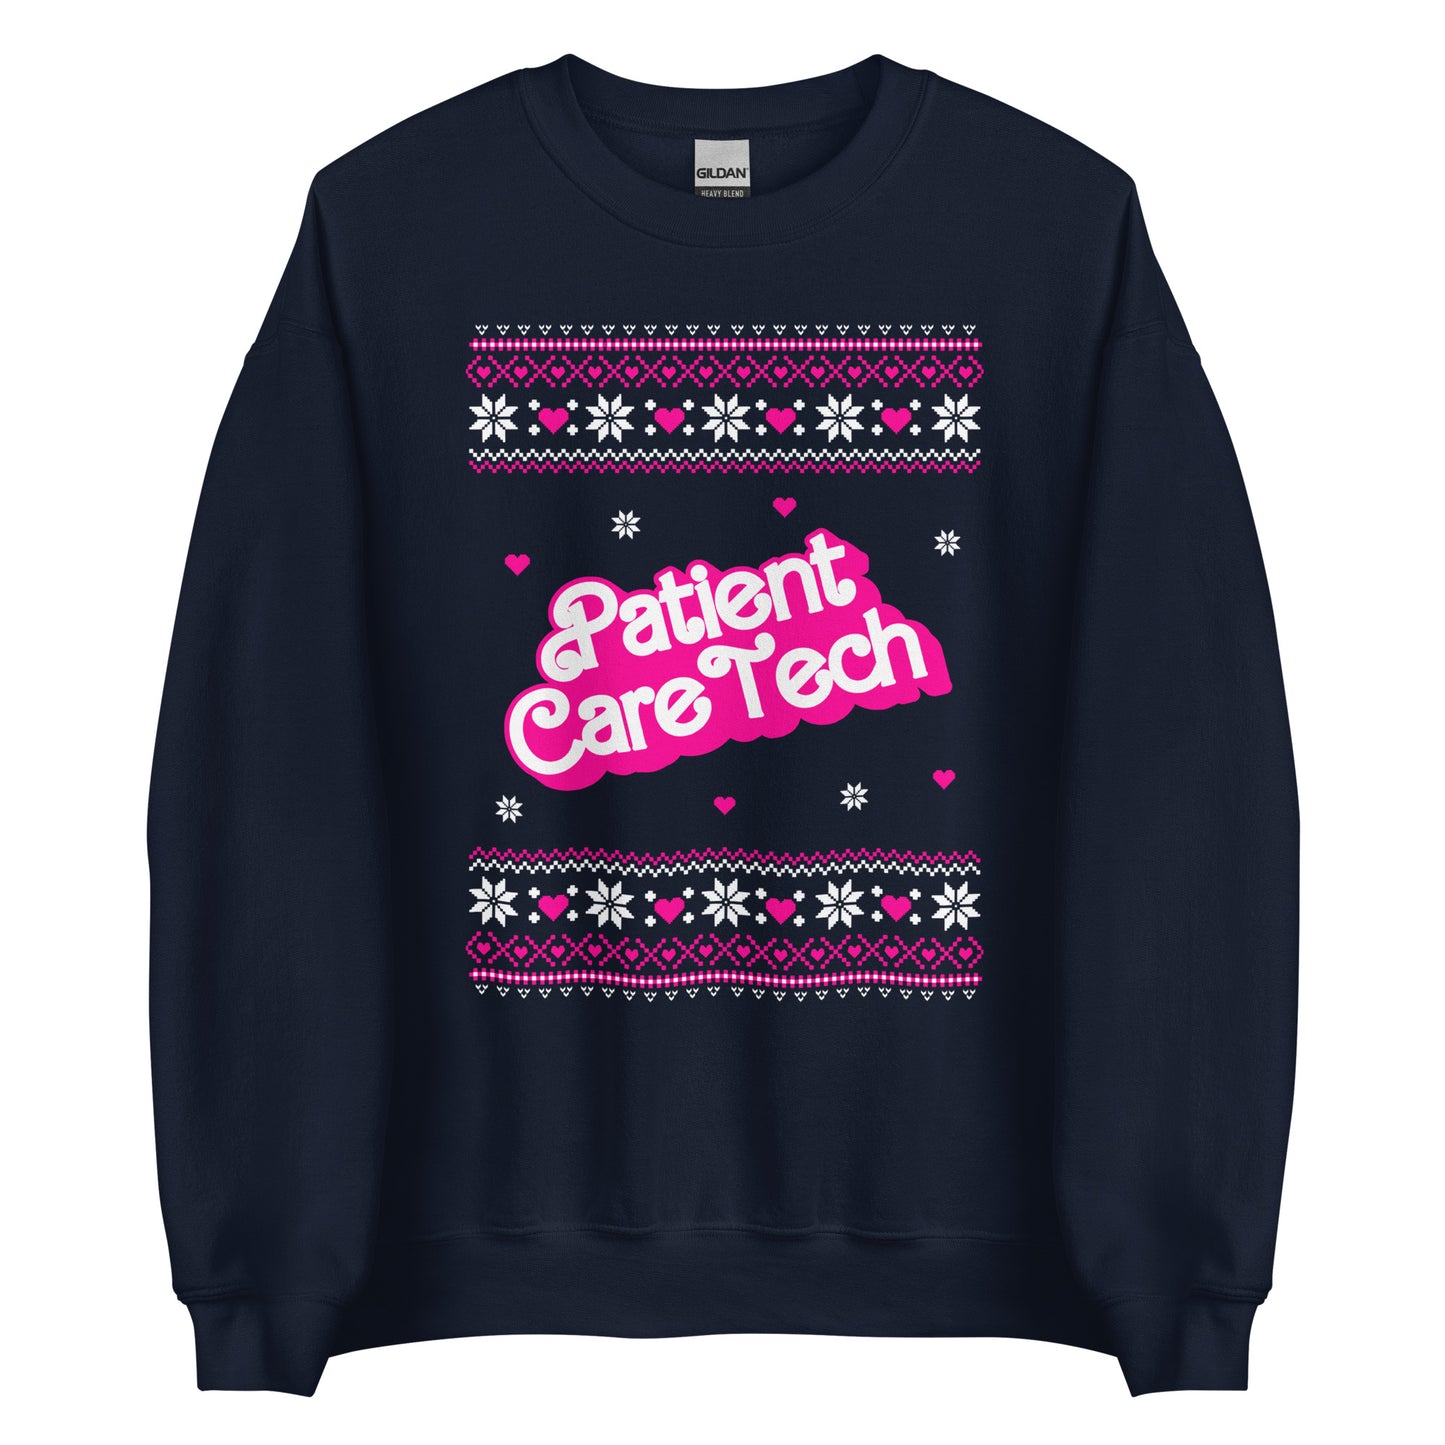 Barbie Patient Care Tech Ugly Christmas Sweater